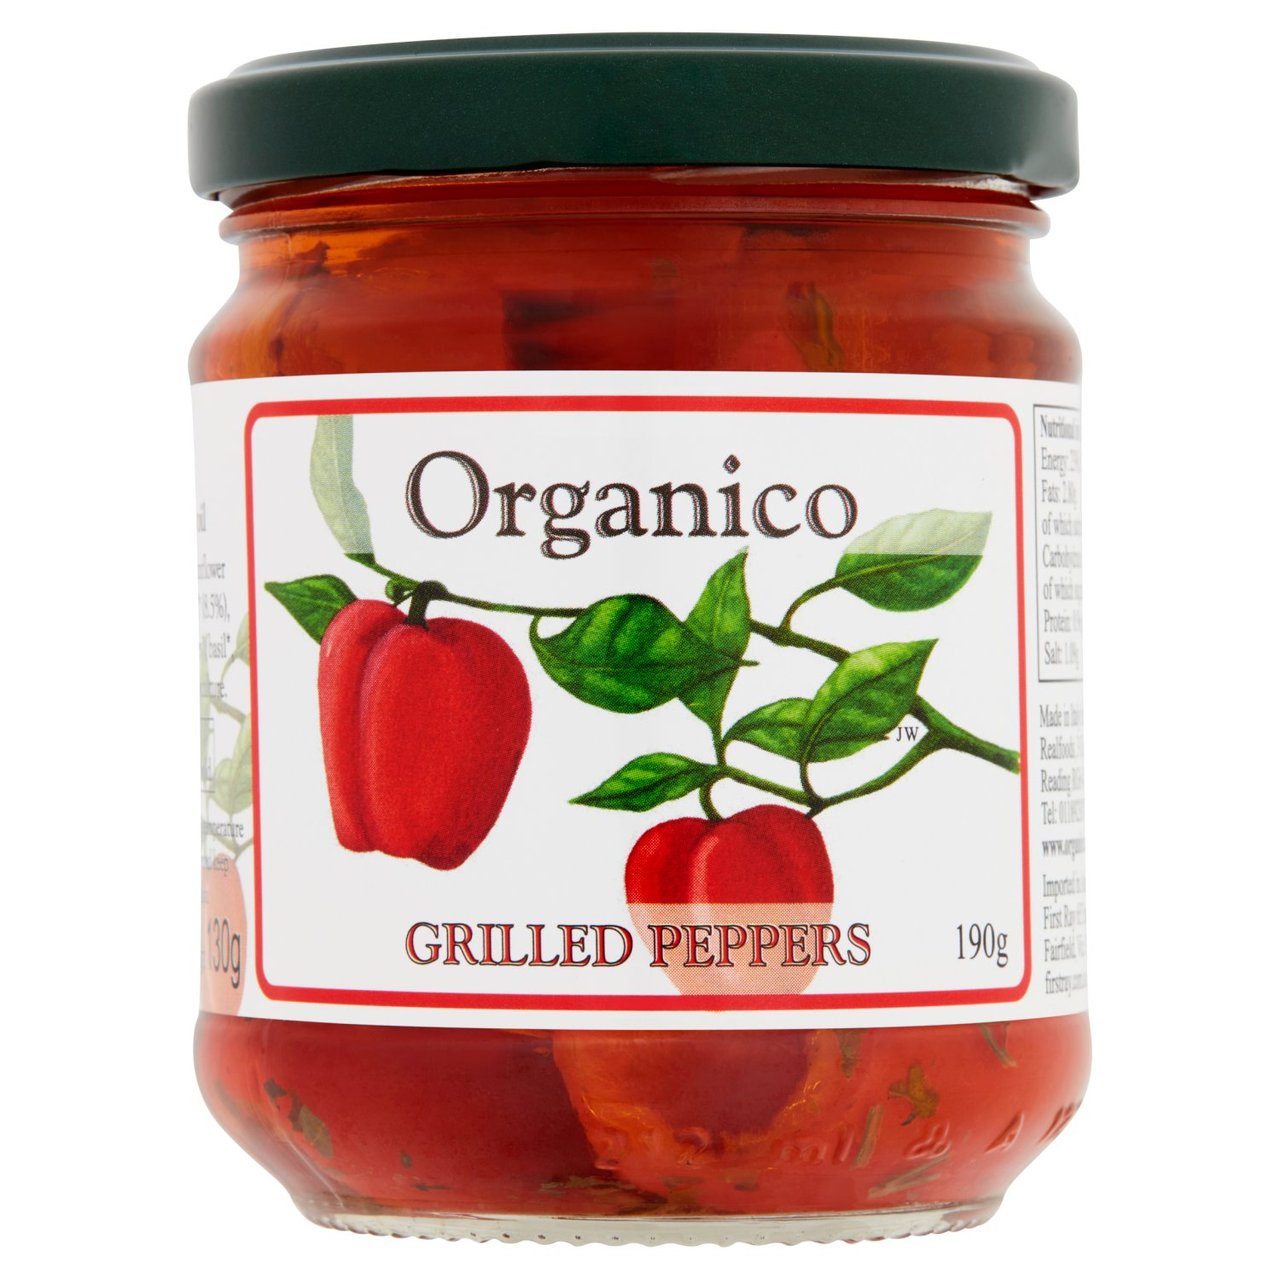 Organico Grilled peppers in oil